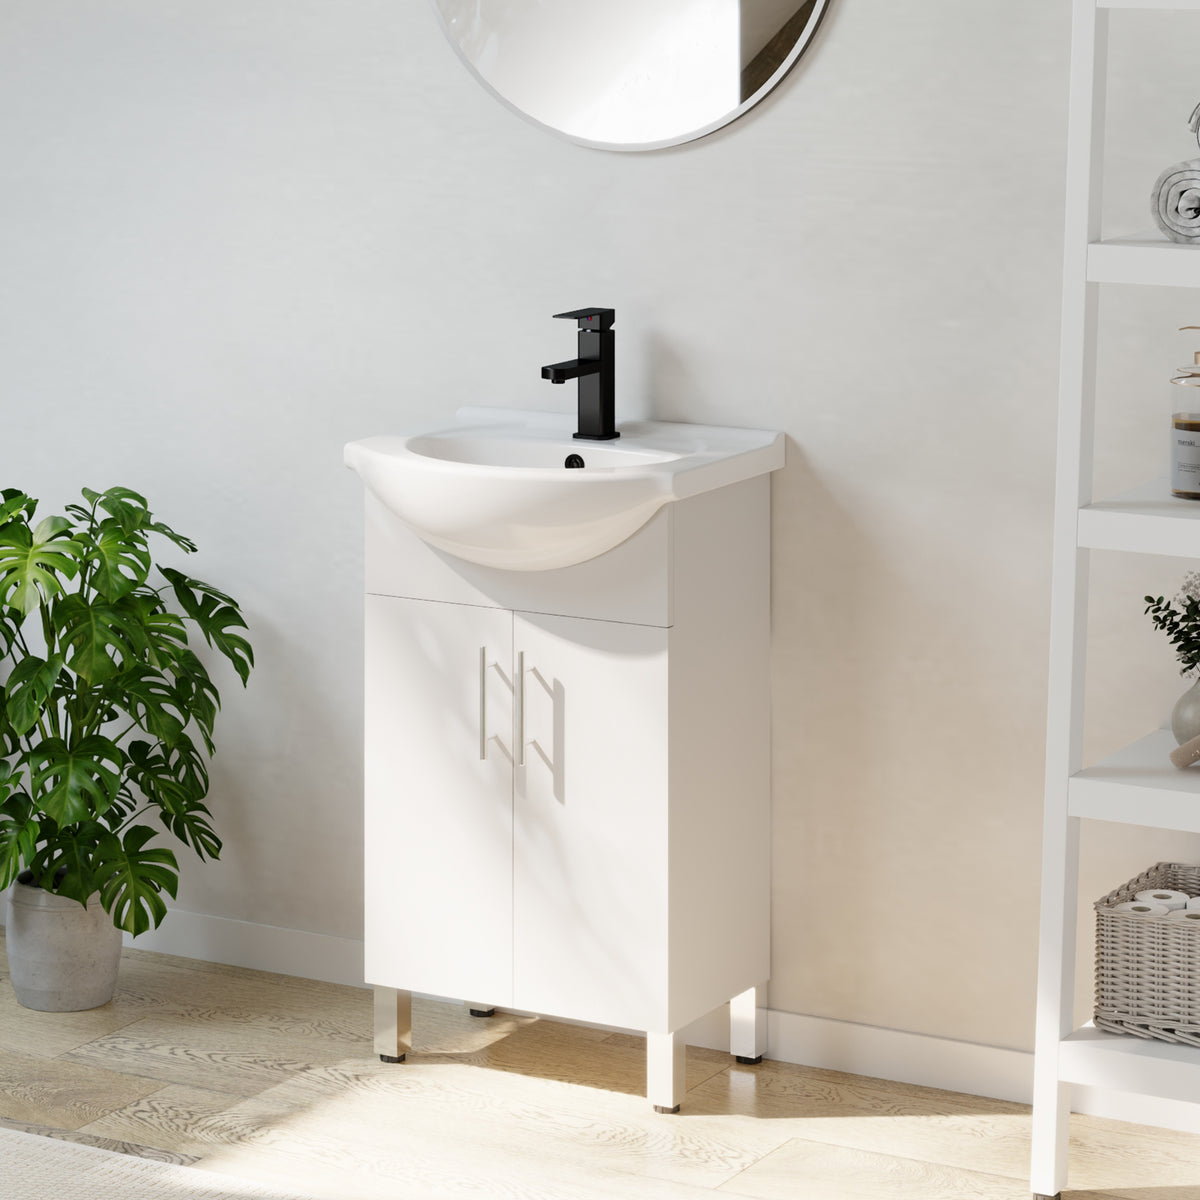 20" Freestanding Bathroom Vanities with Belly Bowl Ceramic Sink Combo Set with Integrated Sink